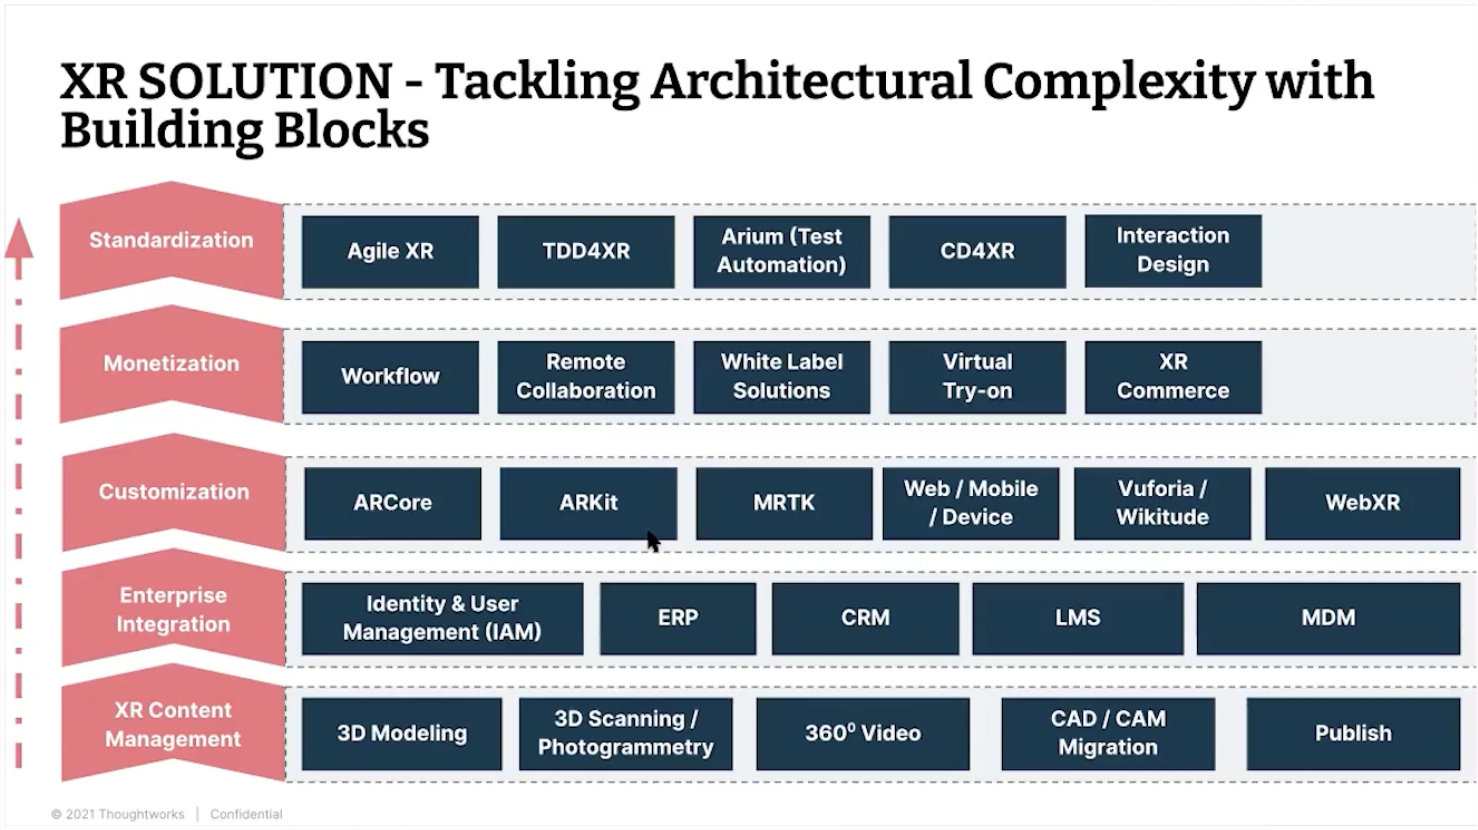 XR Solution: Tackling Architectural Complexity with Building Blocks